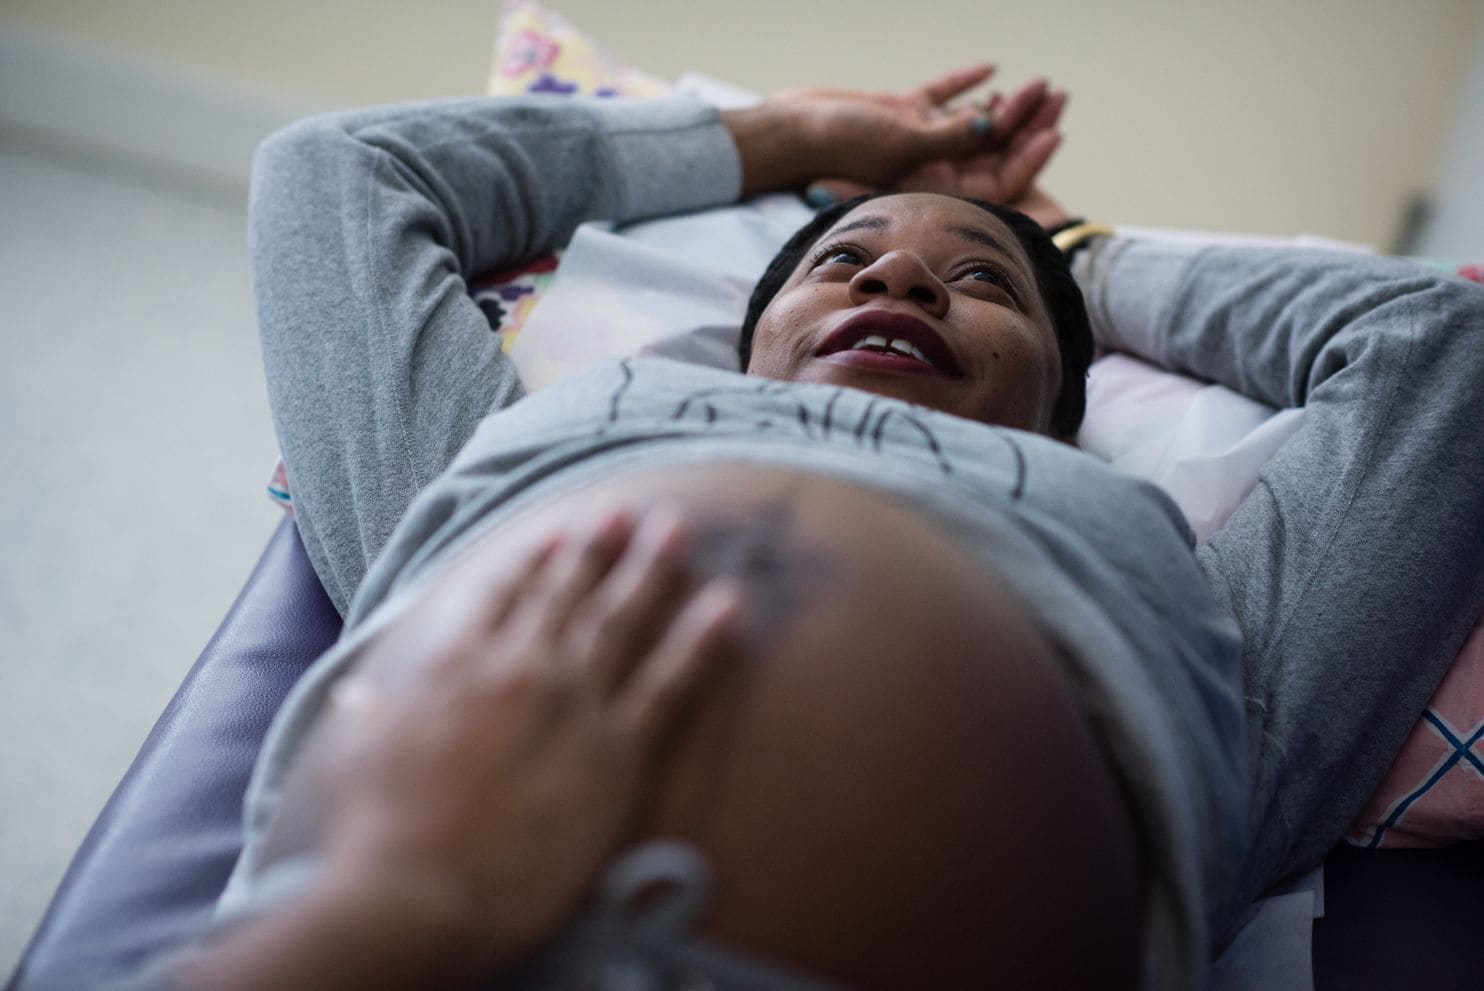 The key to lowering America’s high rates of maternal mortality